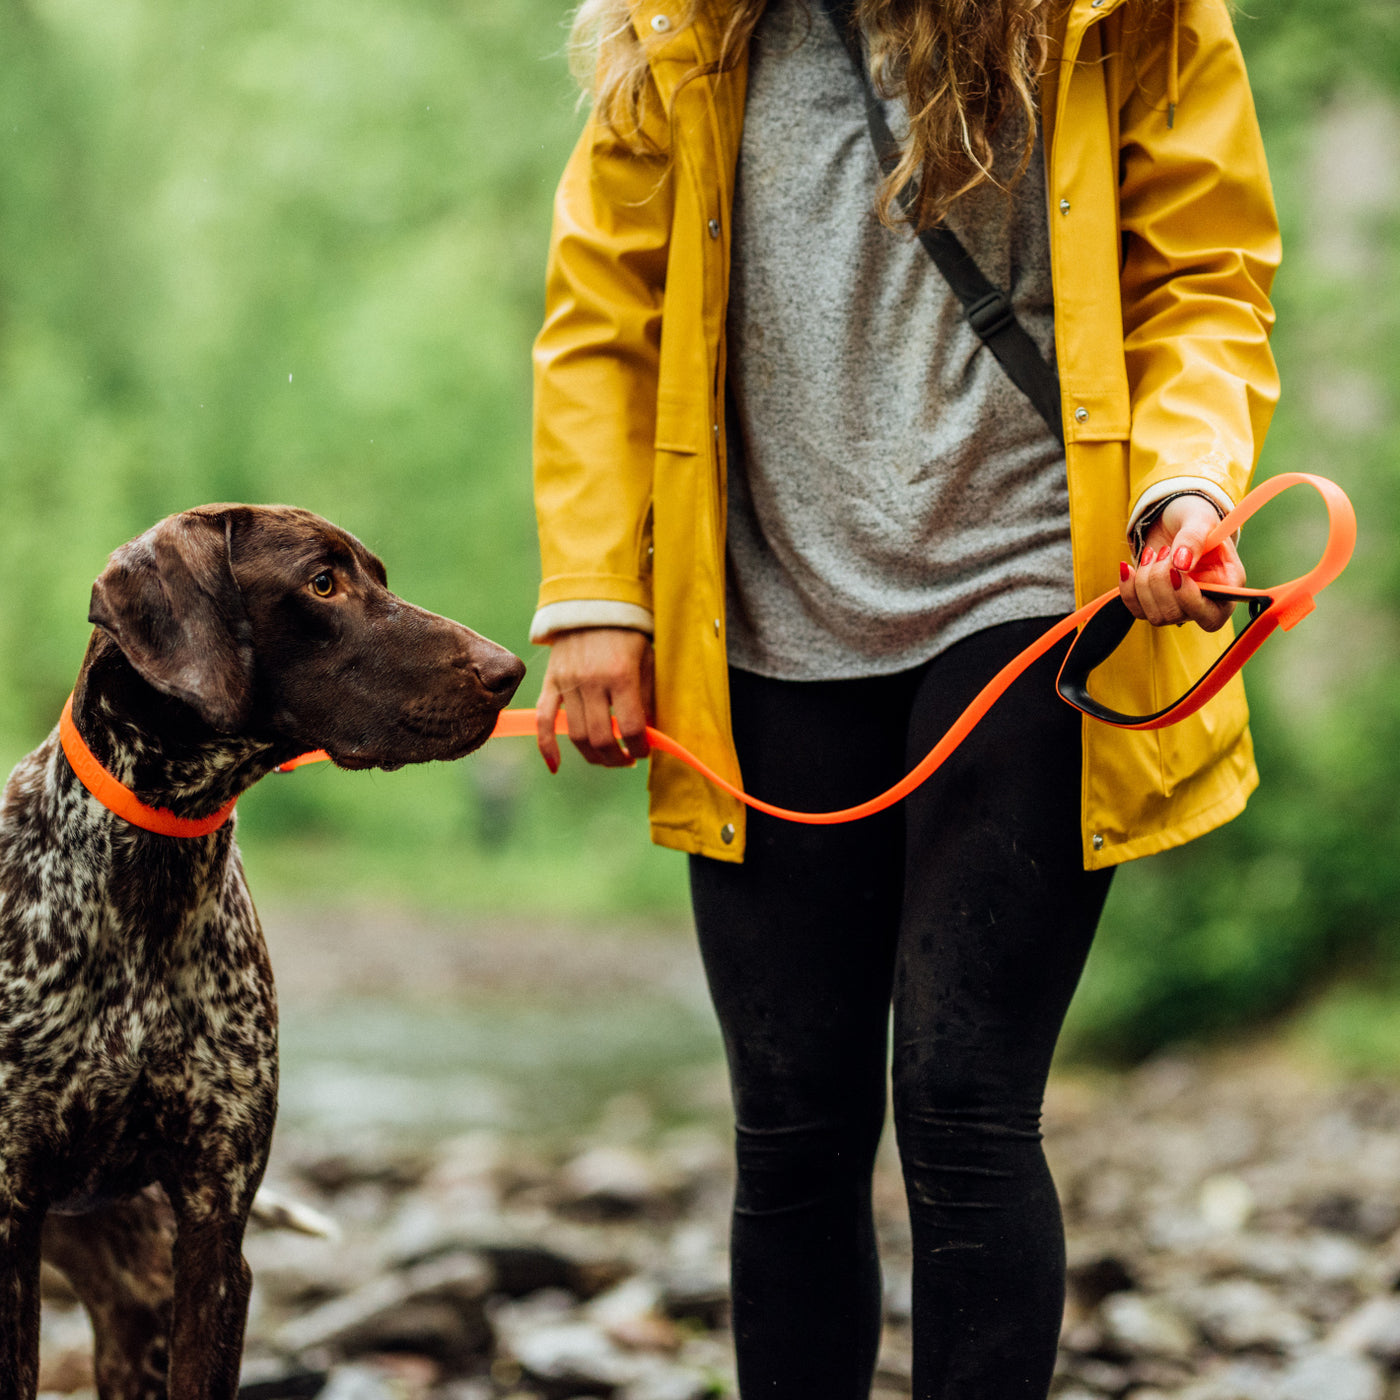 German shorthaired pointer walking on leash